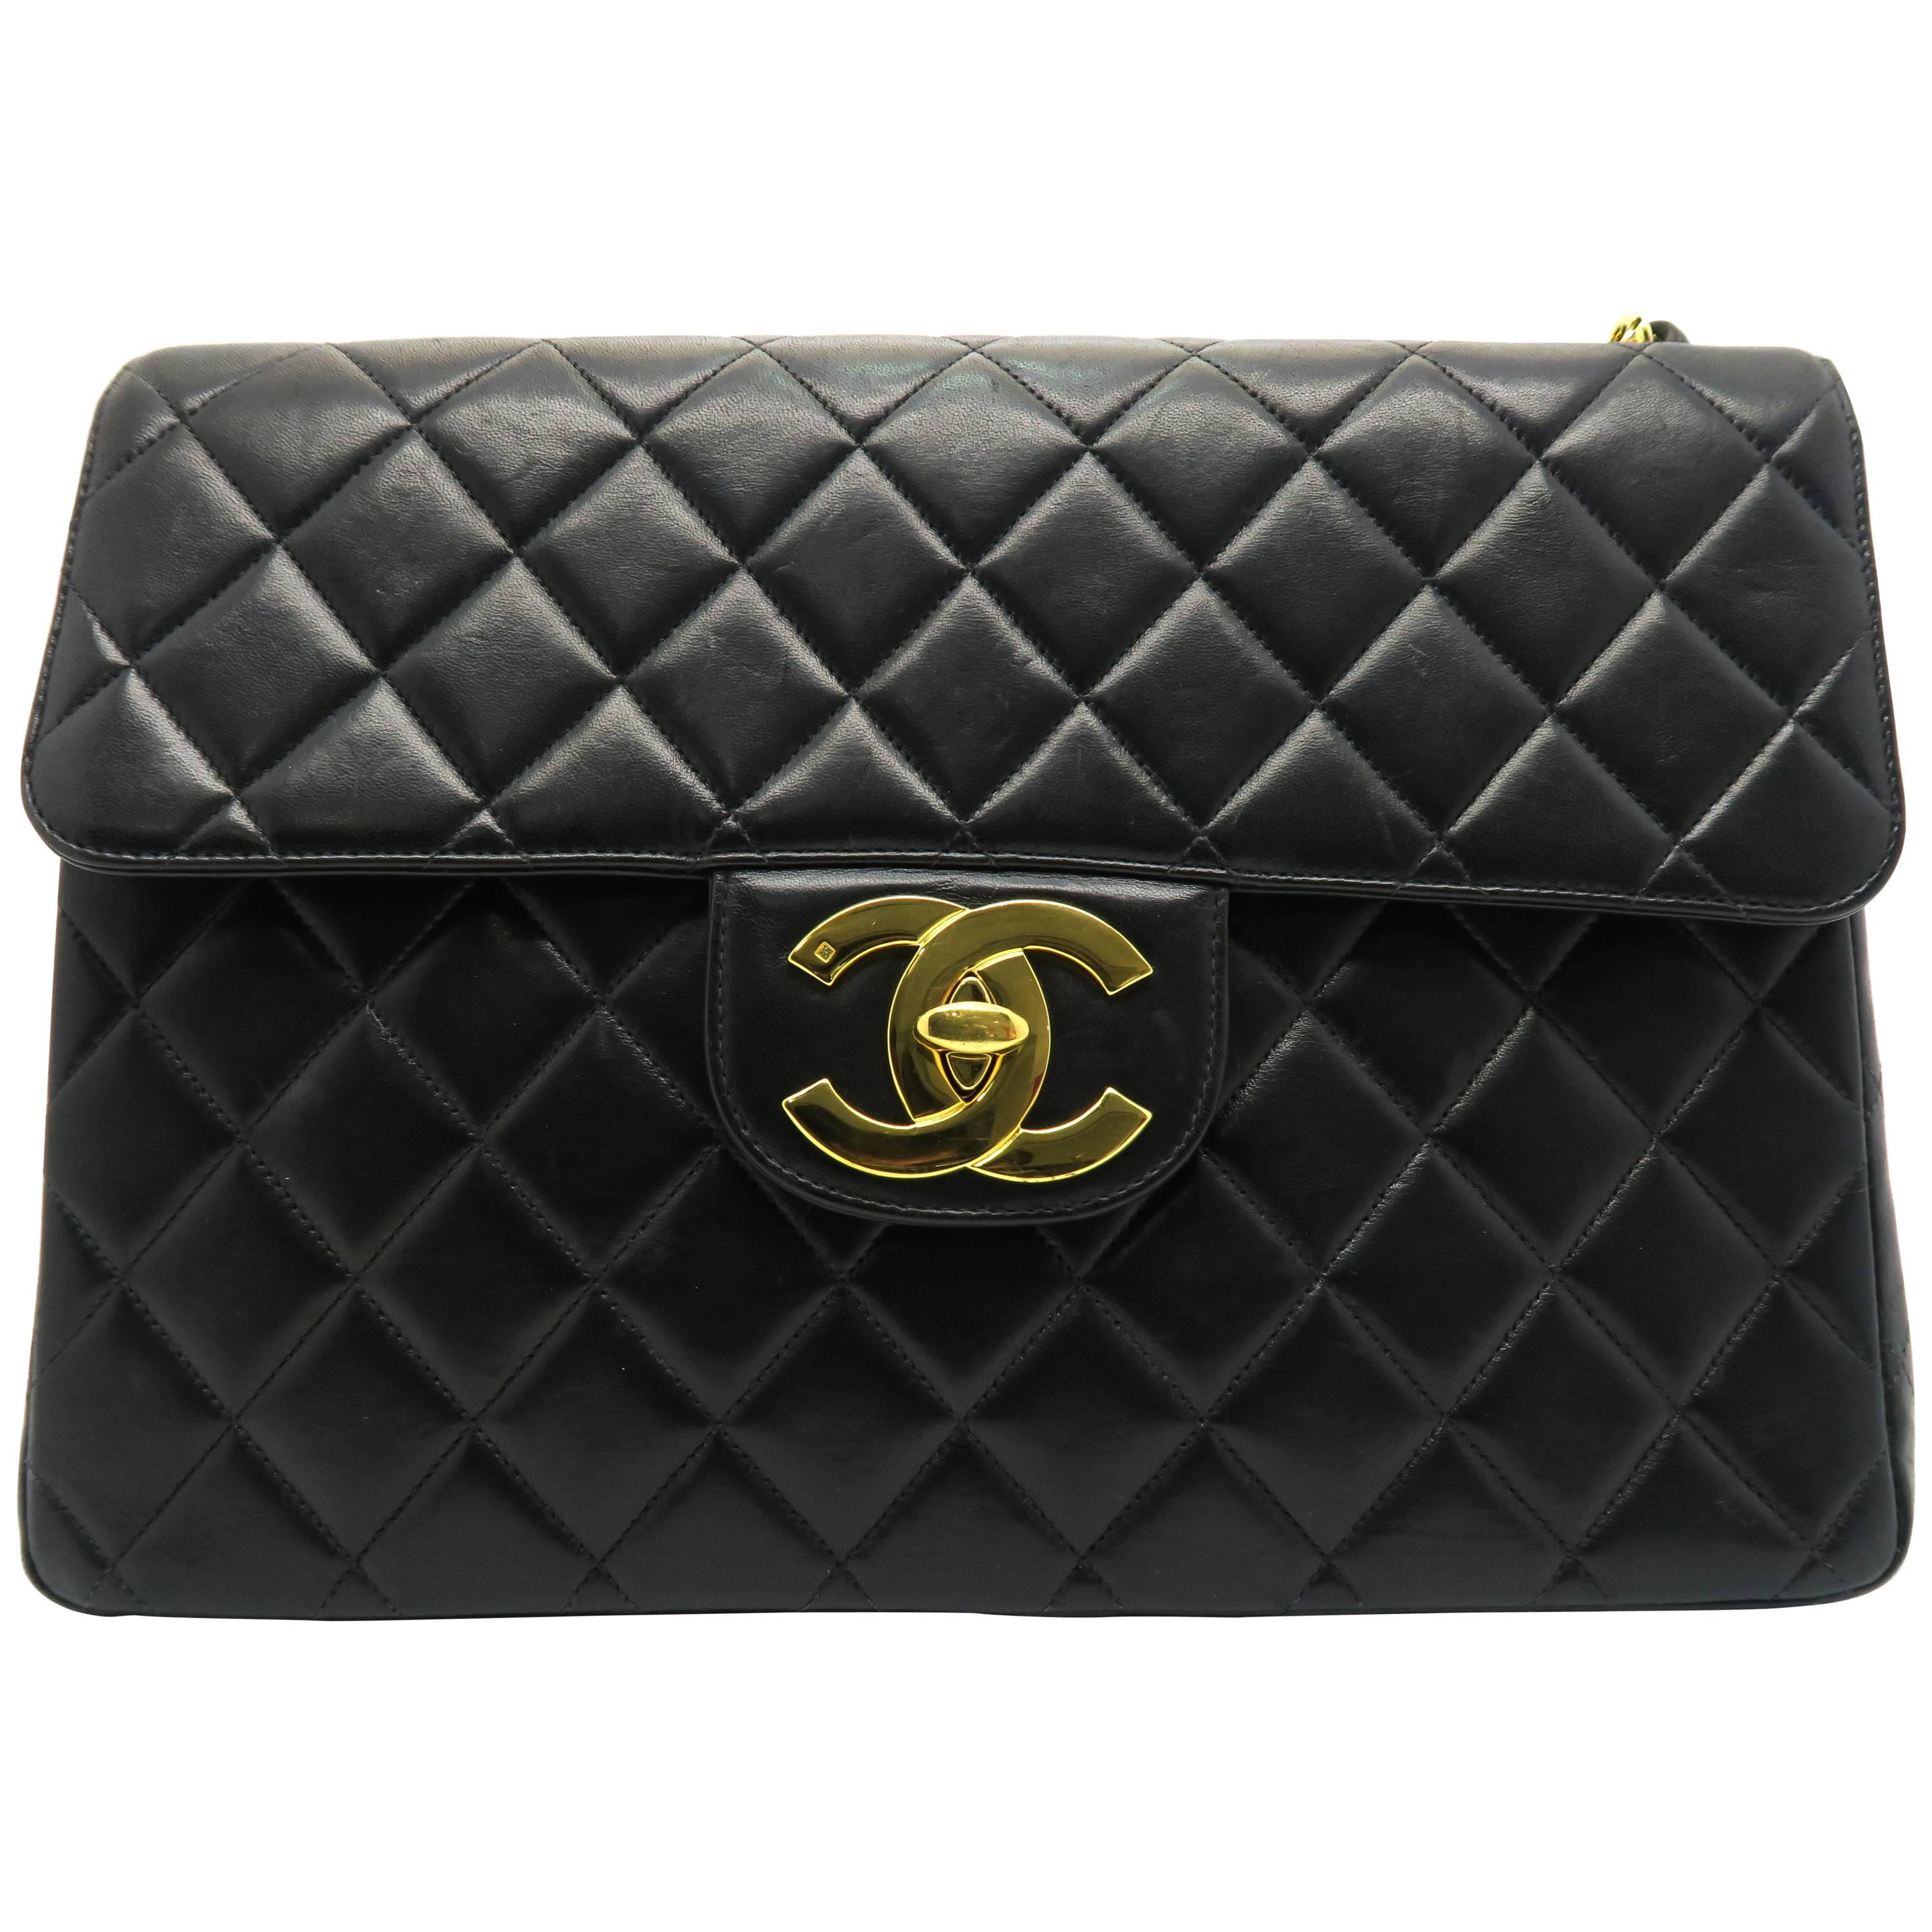 Chanel Black Quilting Lambskin Leather Gold Metal Flap Bag For Sale